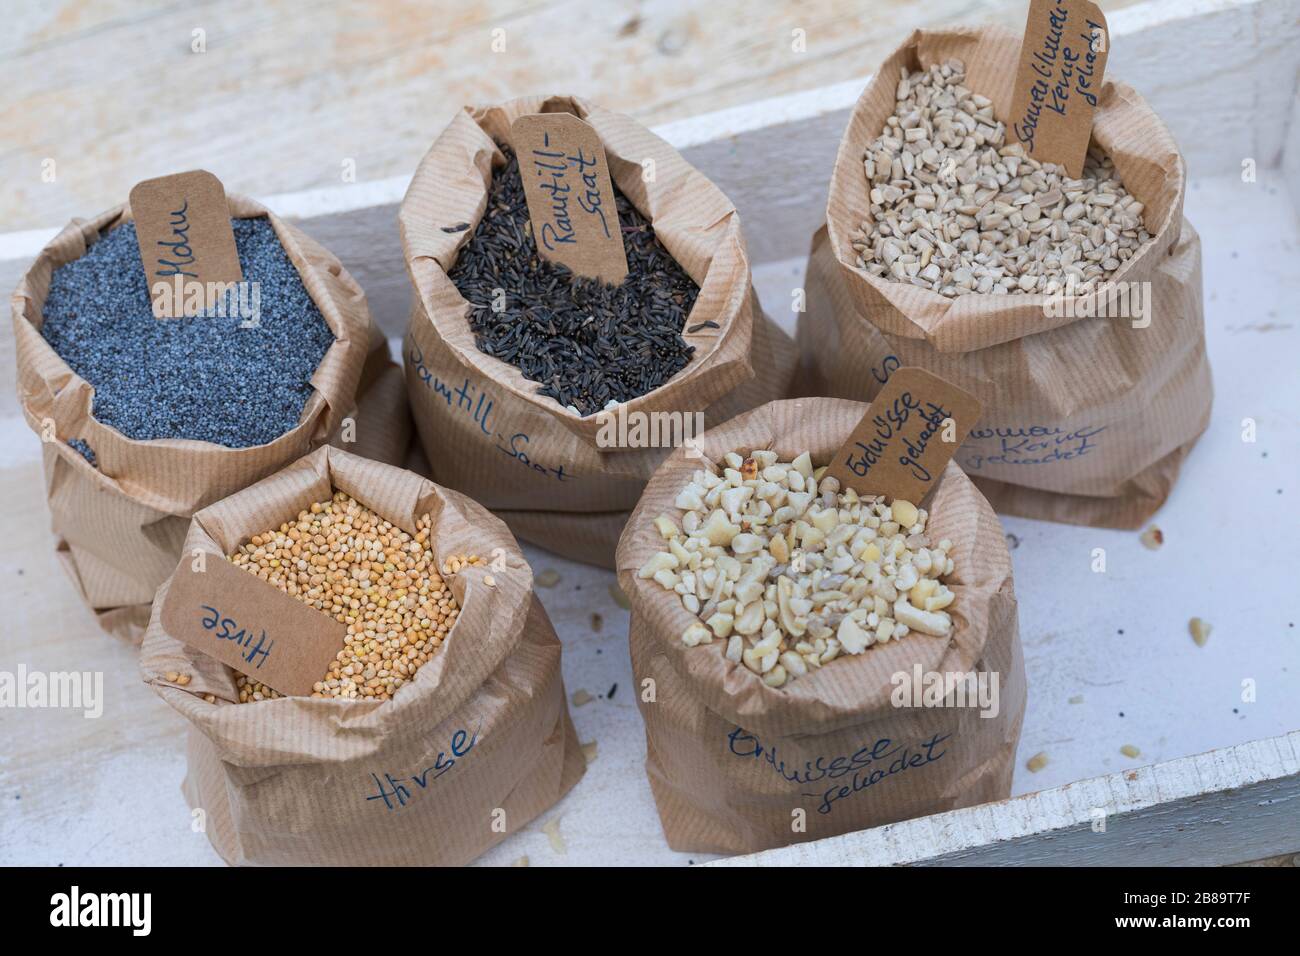 ingredients for mixed birdseeds: poppyseed, ramtil seed, sunflower seeds, millet and chopped peanuts, Germany Stock Photo